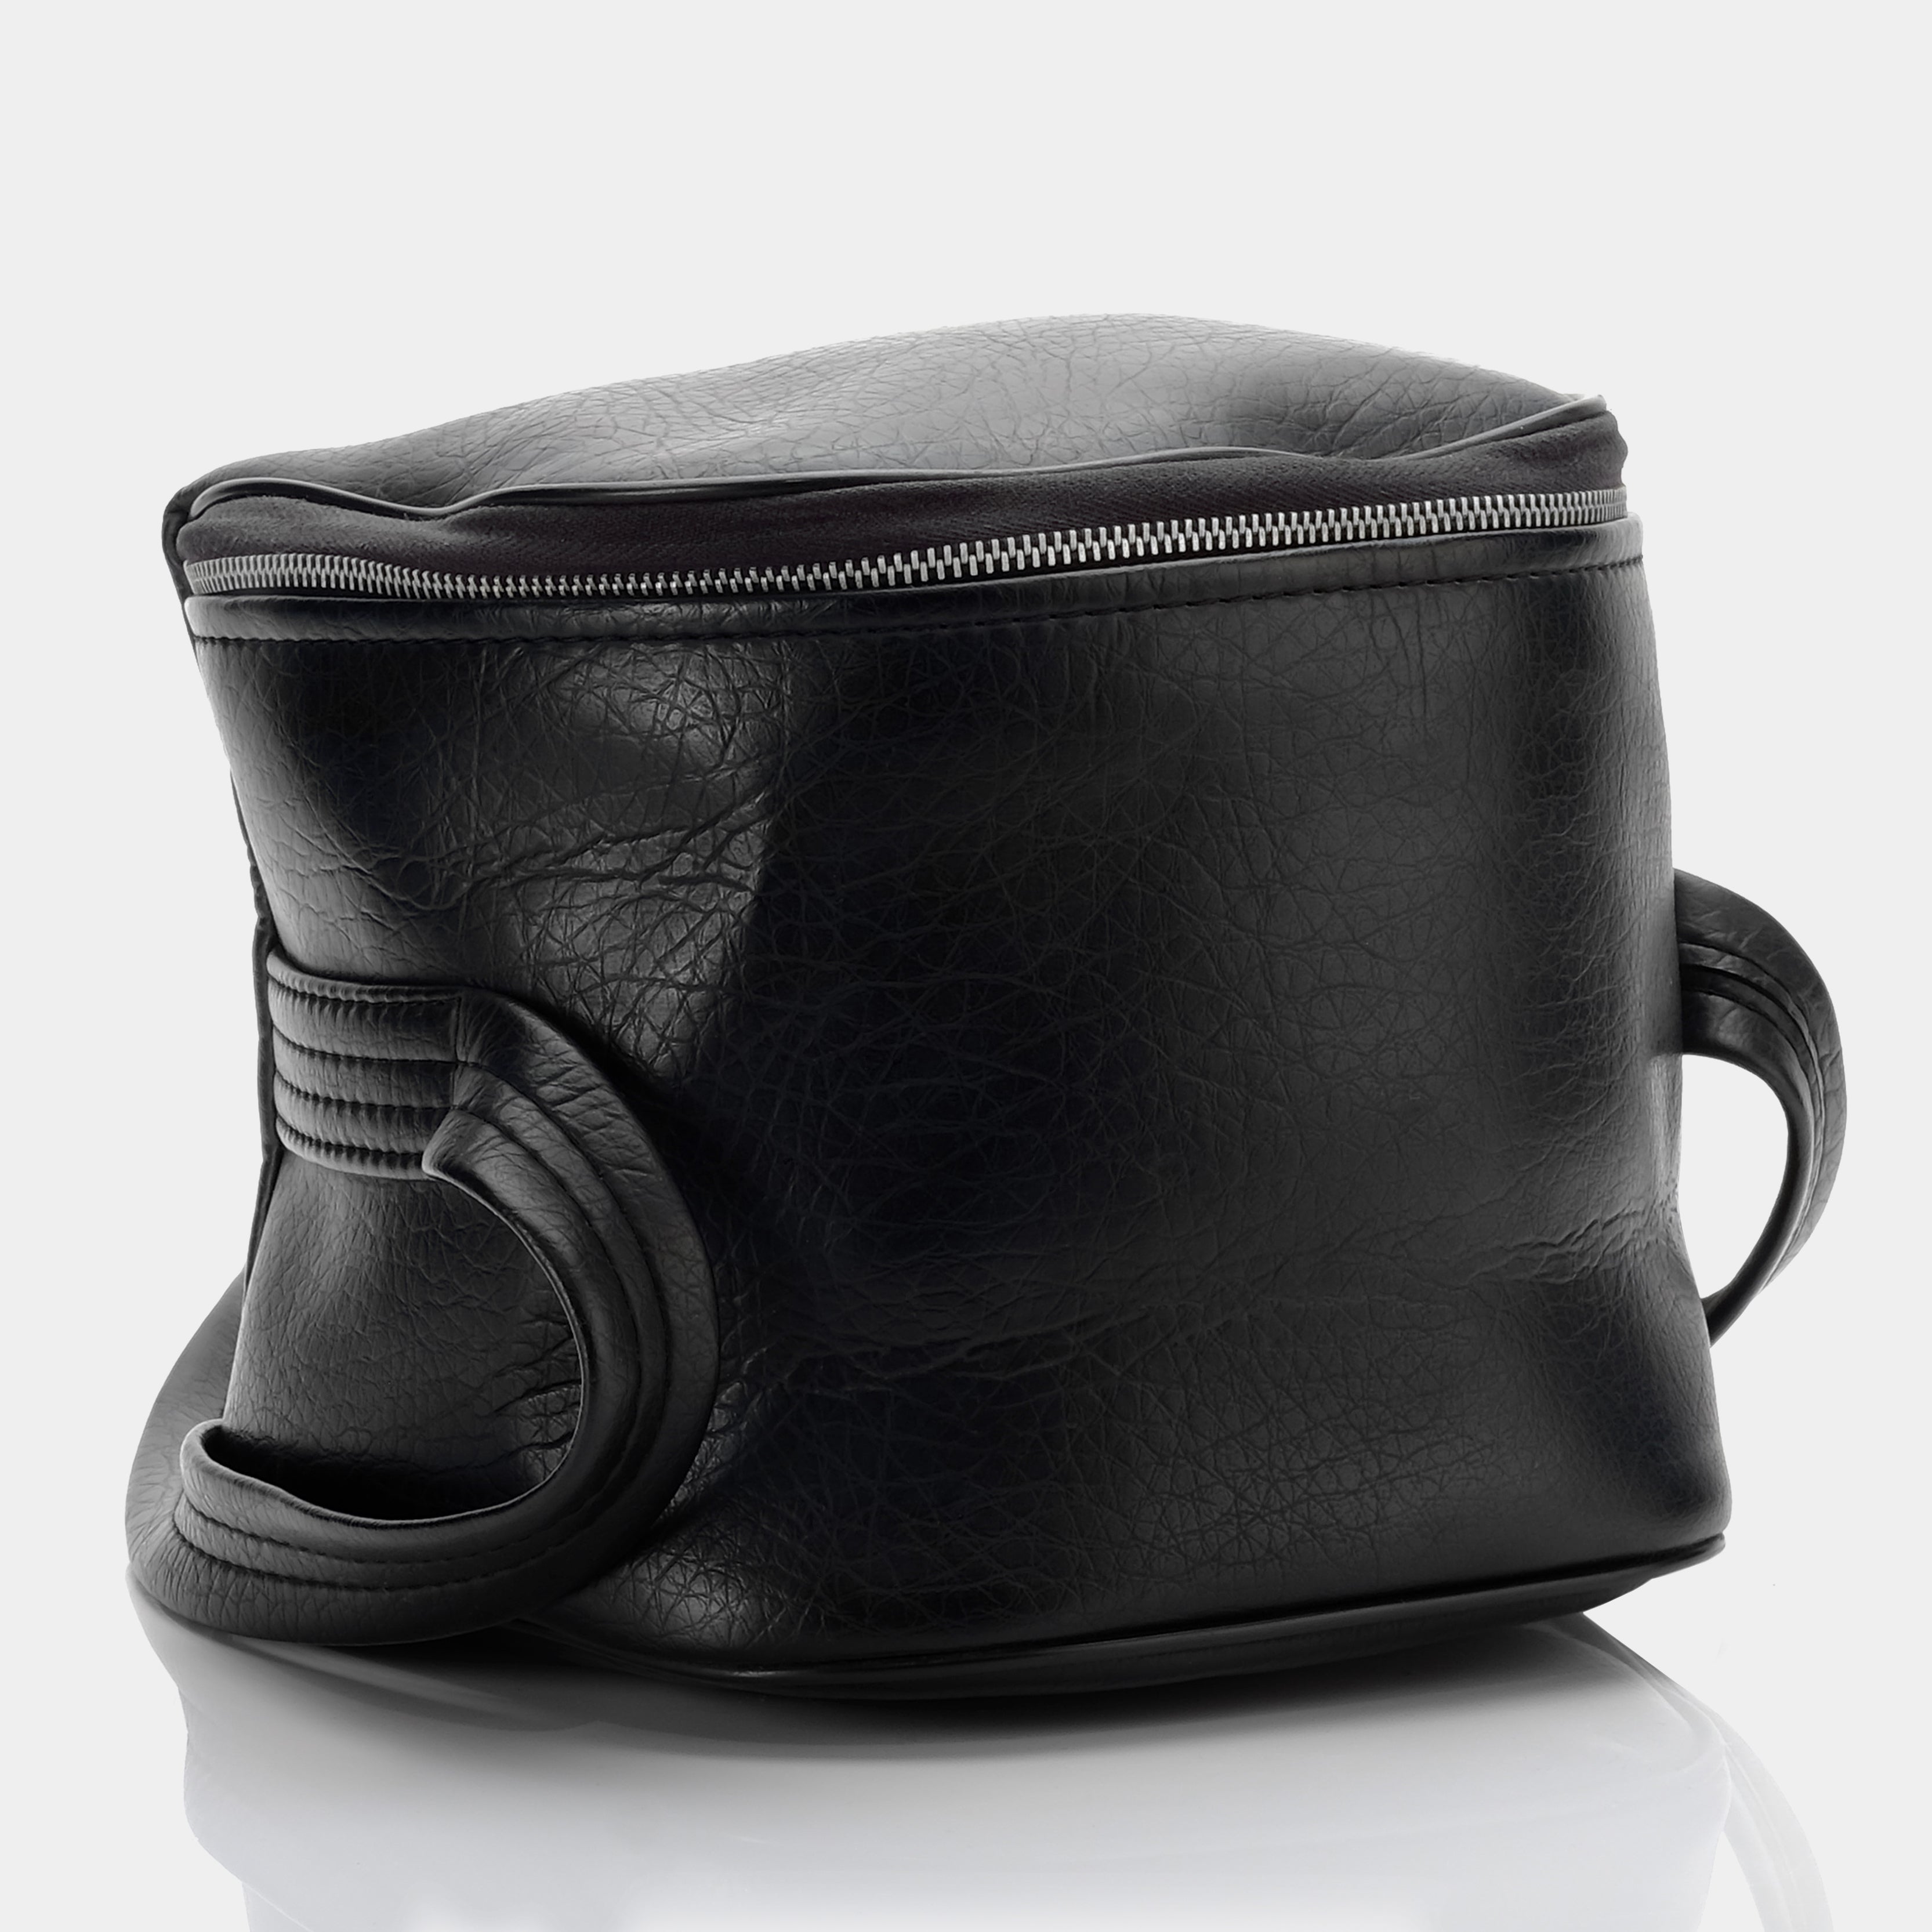 Rounded Black Faux Leather Instant Camera Bag